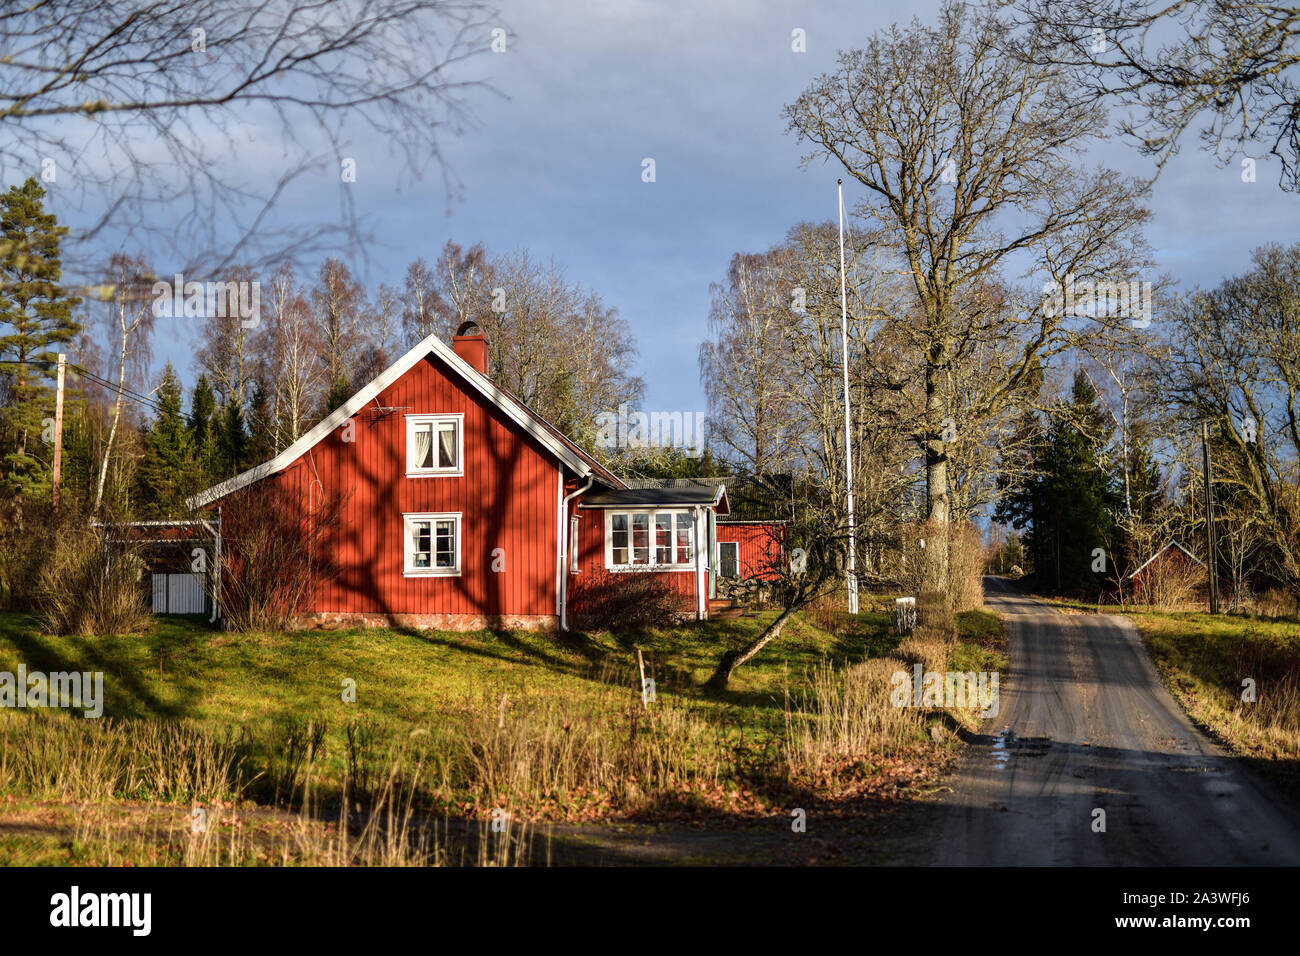 Sweden: Hokerum. Rural landscape, Ulricehamn Municipality, Vastra Gotaland County. Traditional Swedish wooden house with red and white facades on the Stock Photo